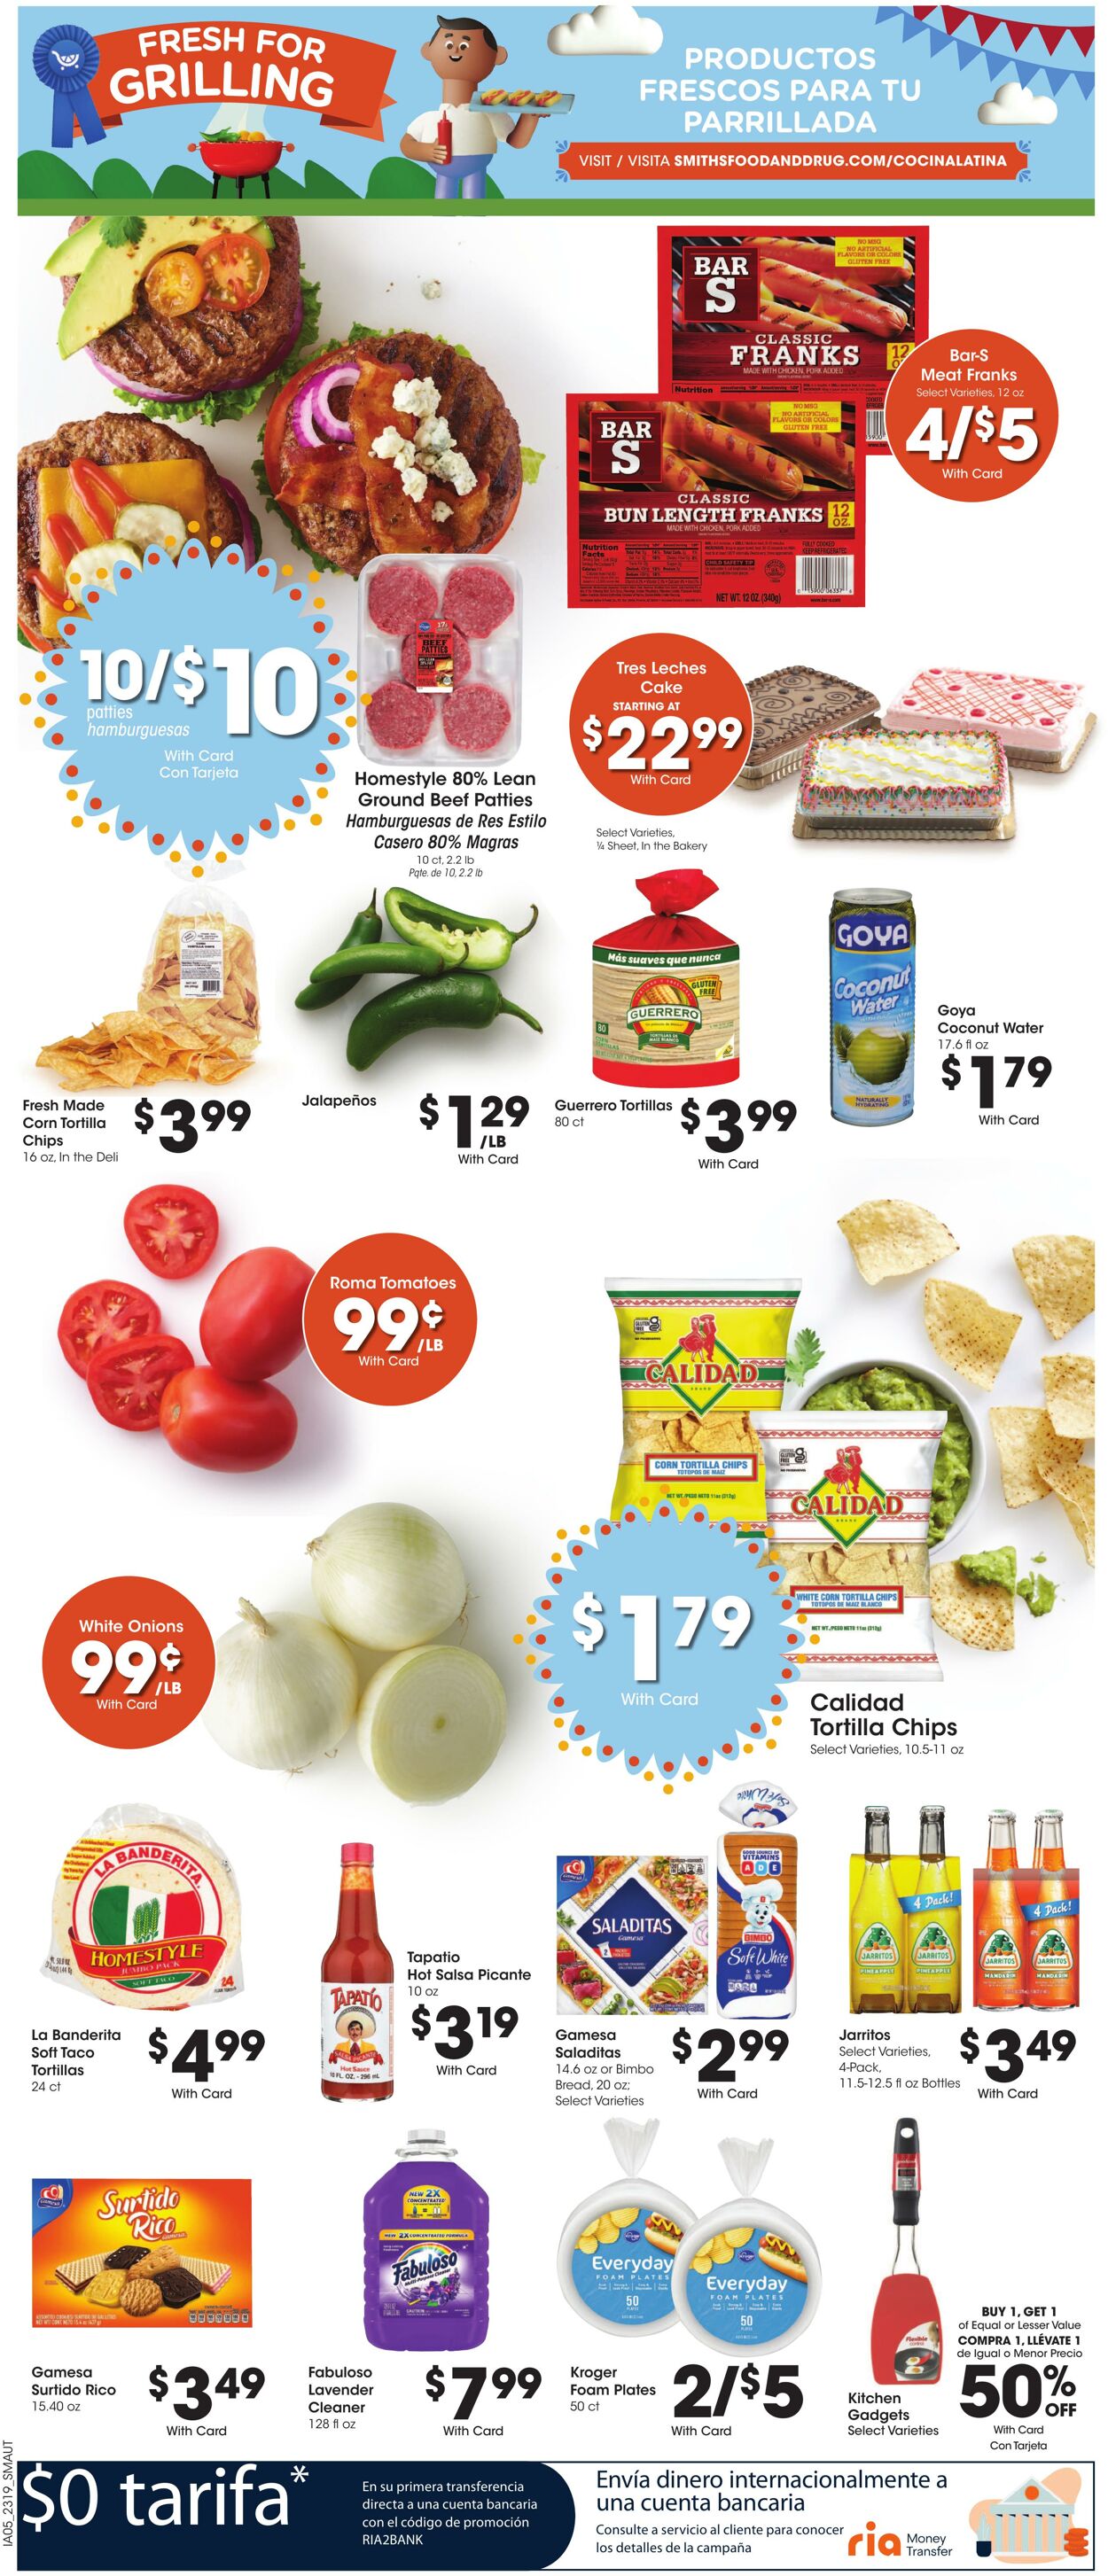 Weekly ad Smith’s Food and Drug 06/07/2023 - 06/13/2023